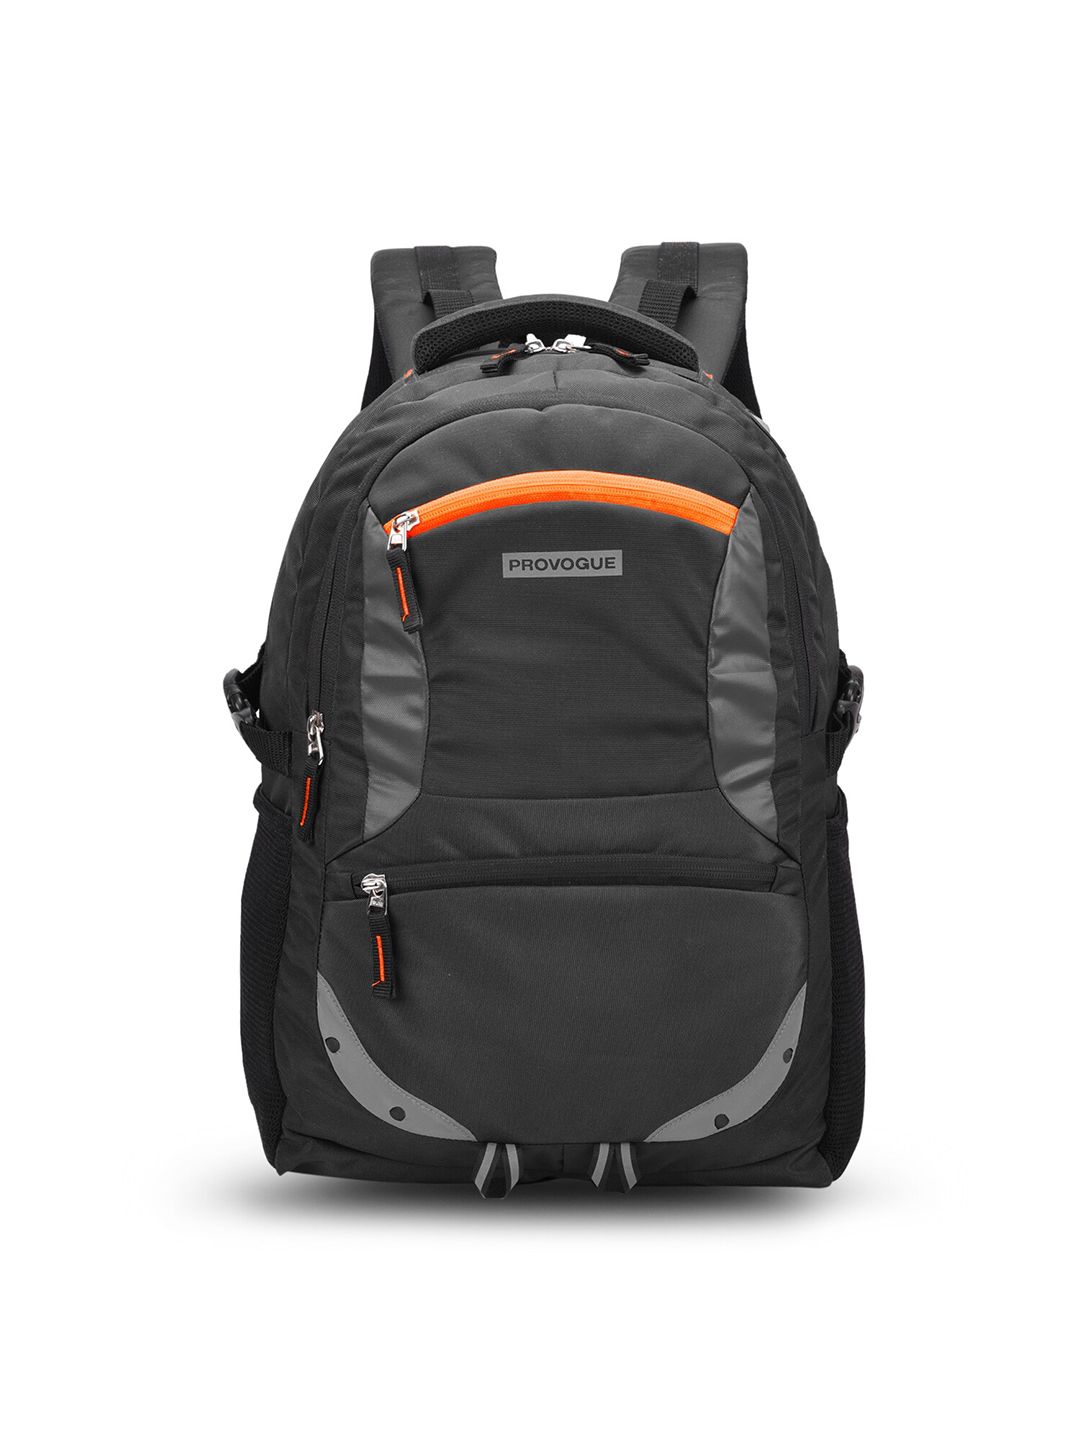 Provogue Unisex Black & Grey Brand Logo Backpack With Reflective Strip Price in India